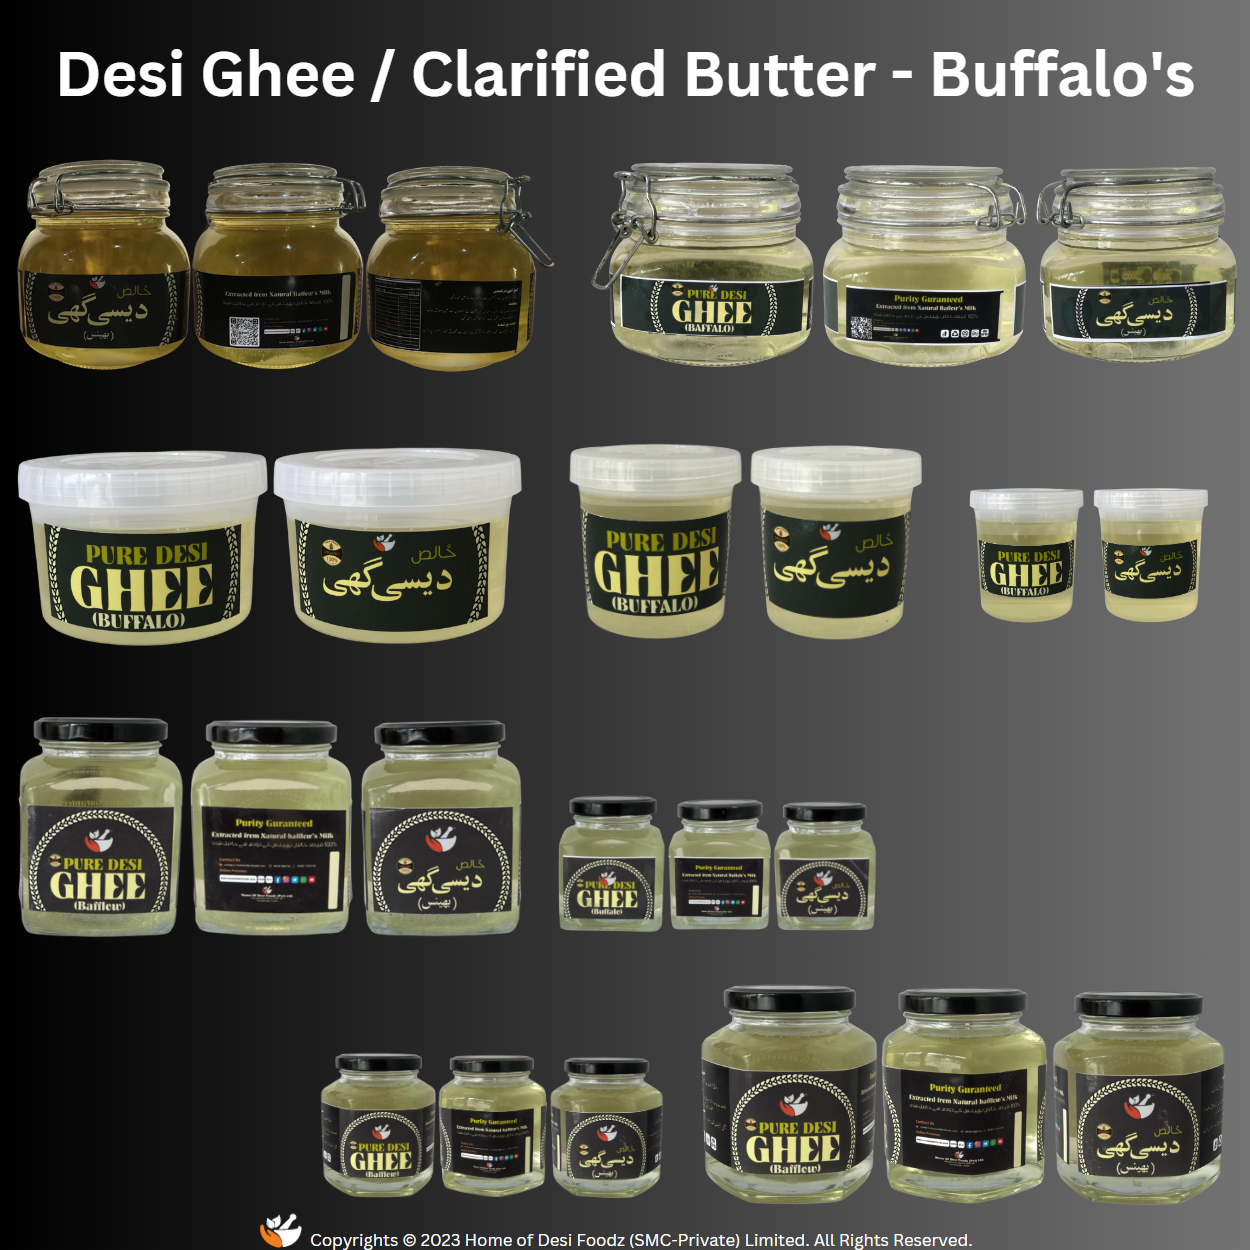 images/sliders/mobile/buffalos-desi-ghee-clarifed-butter-by-home-of-desi-foodz.png